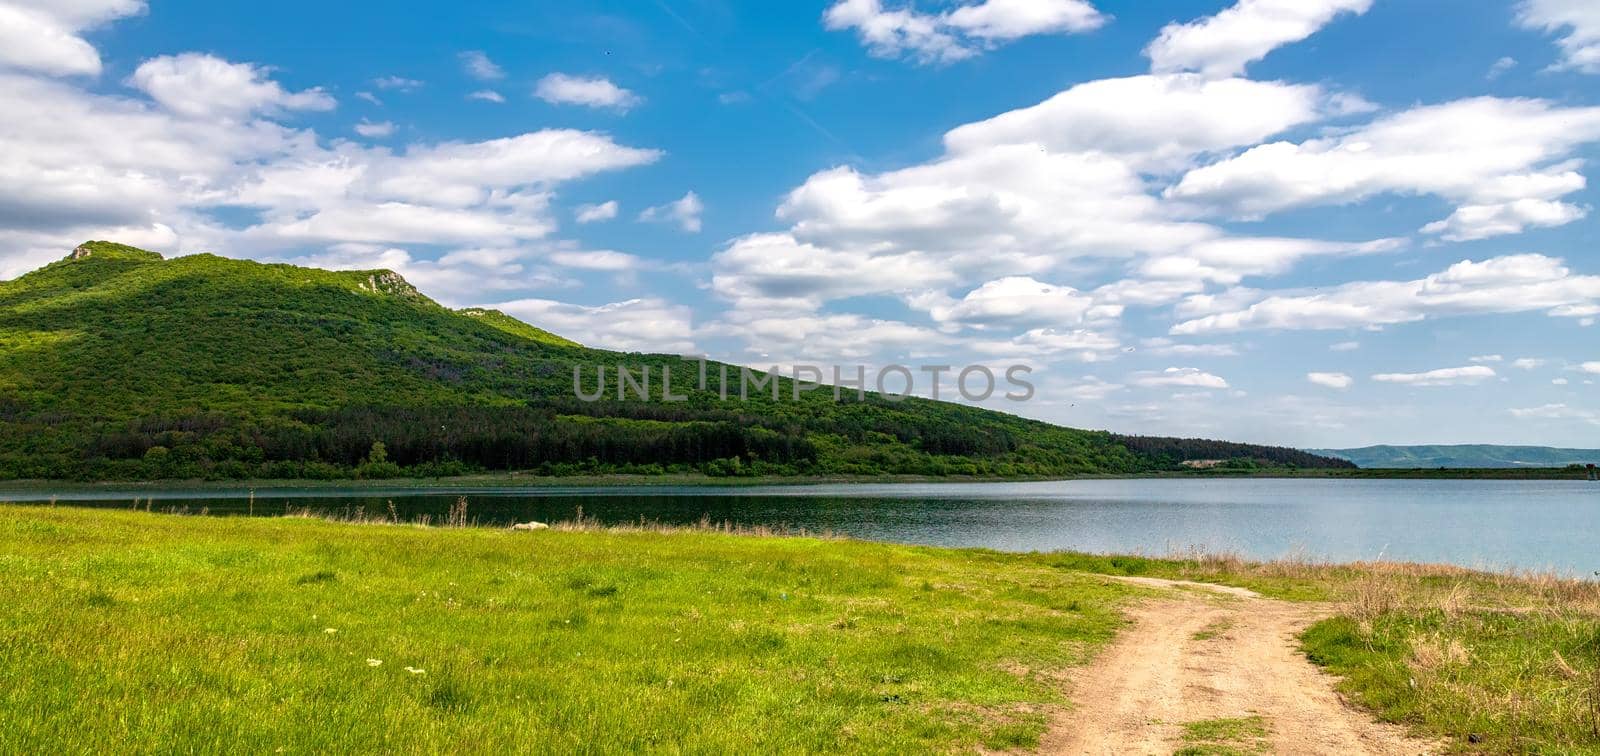 Panoramic view of a lake among hills and country road by EdVal